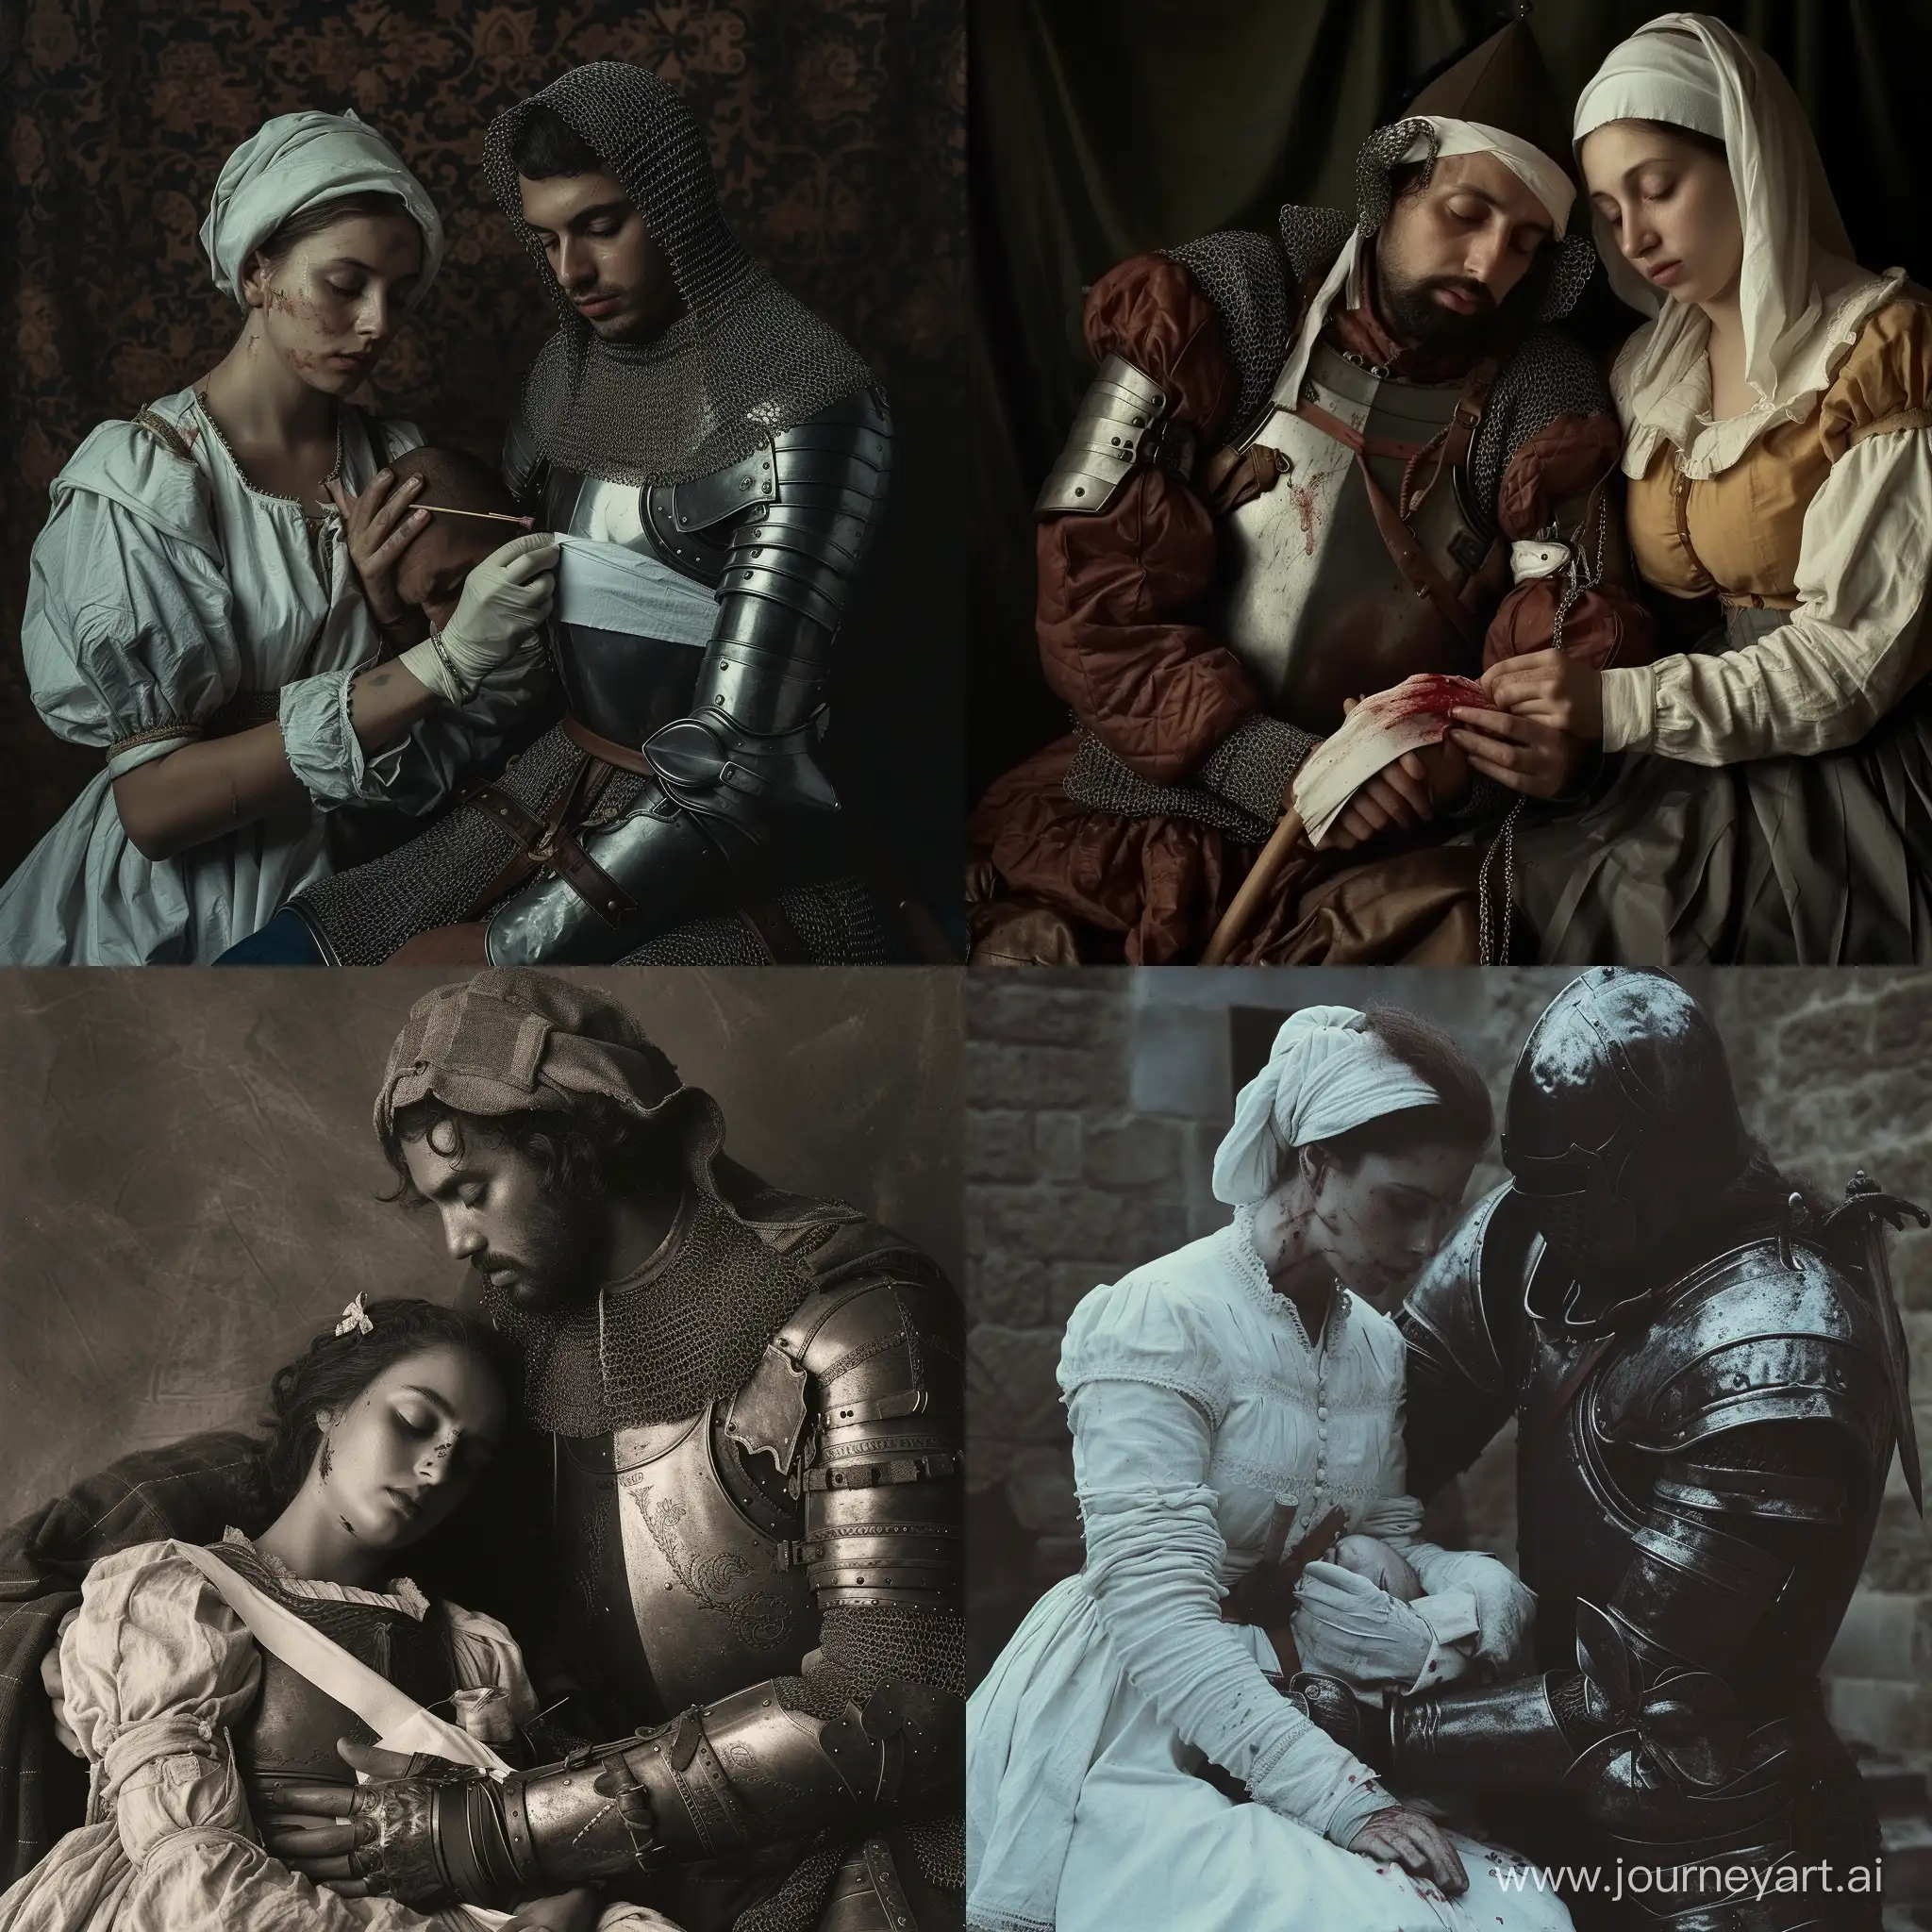 a nurse bandages a wounded warrior, 16th century, hyperrealism, sadness, 80s photography,